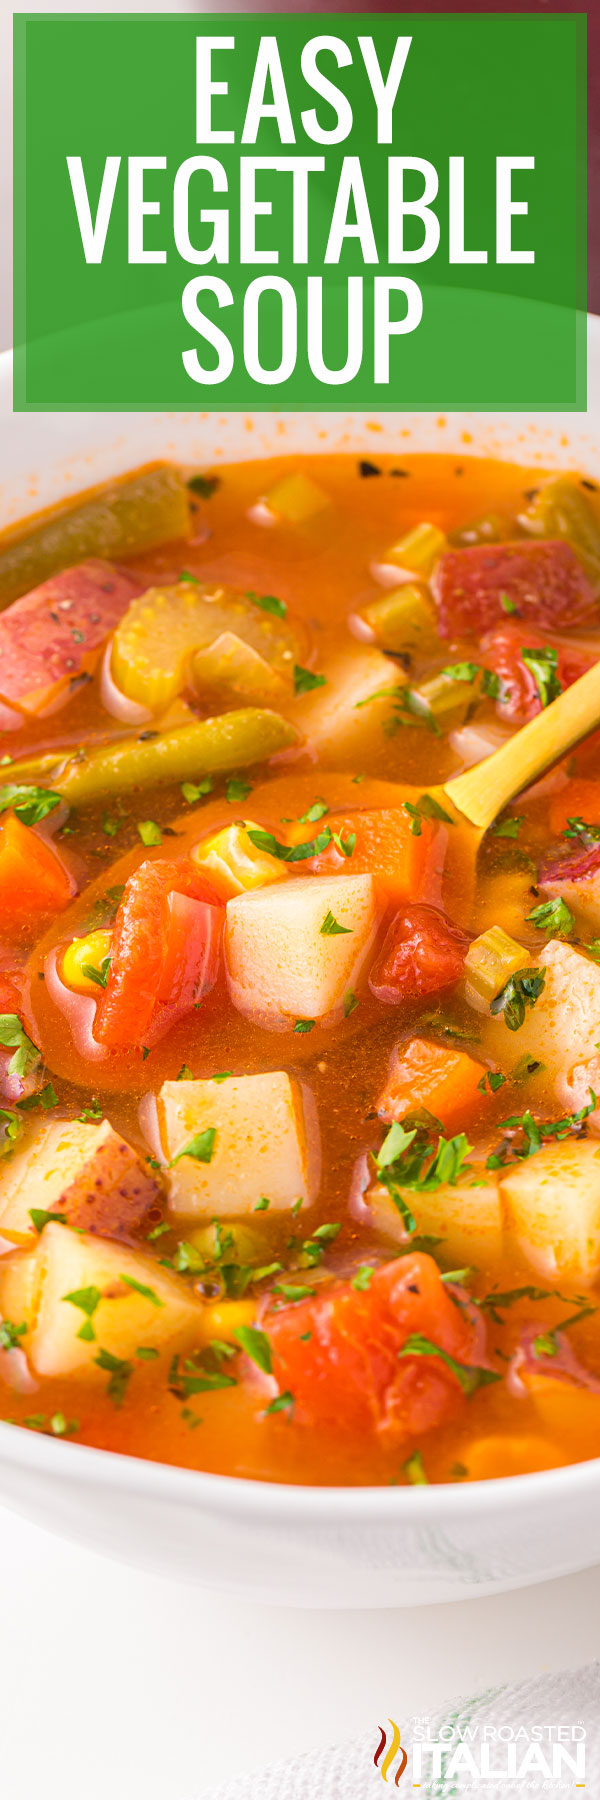 easy vegetable soup.